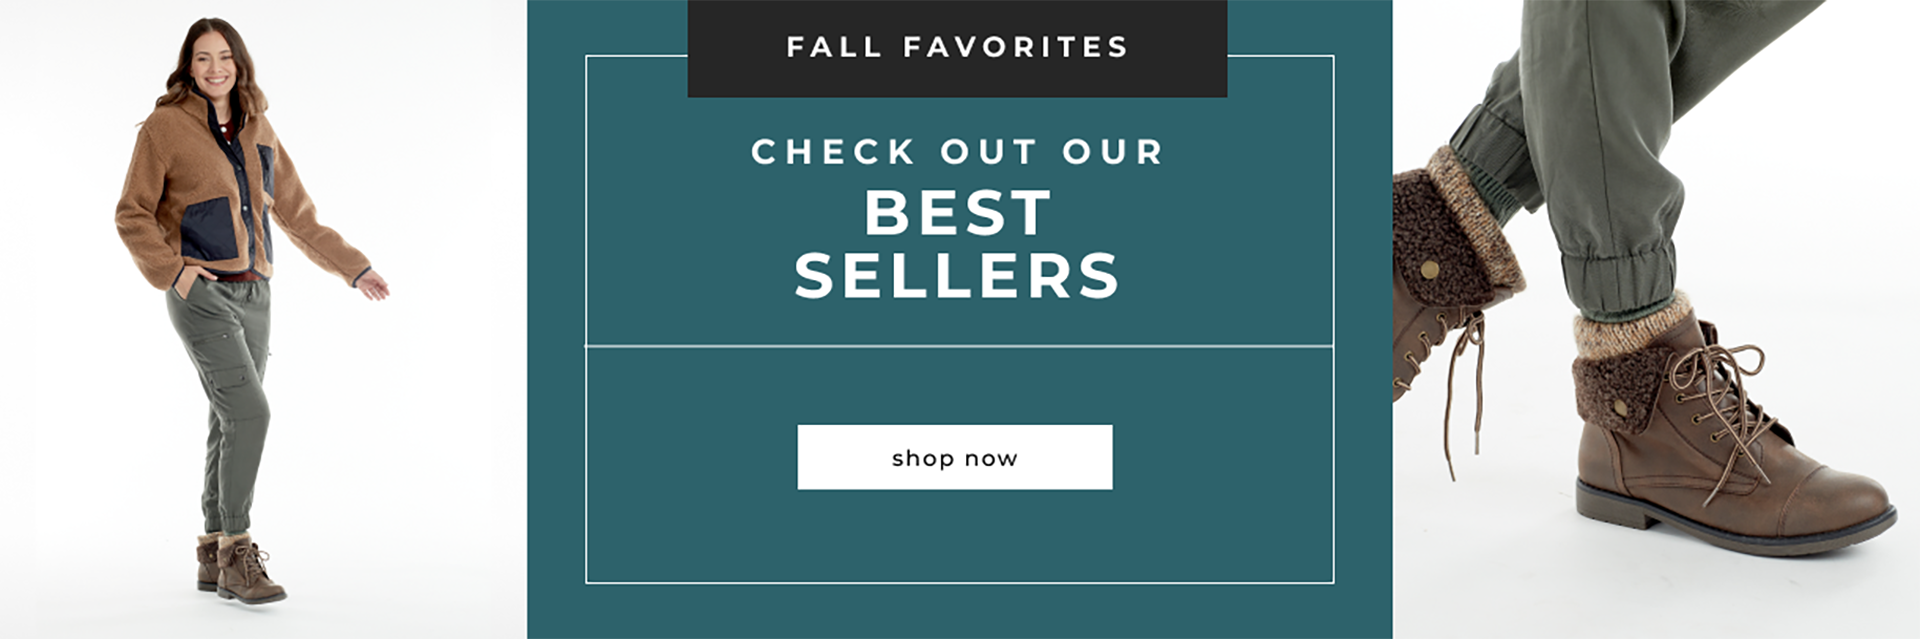 Fall Favorites | Check Out Our Best Sellers | Shop Now